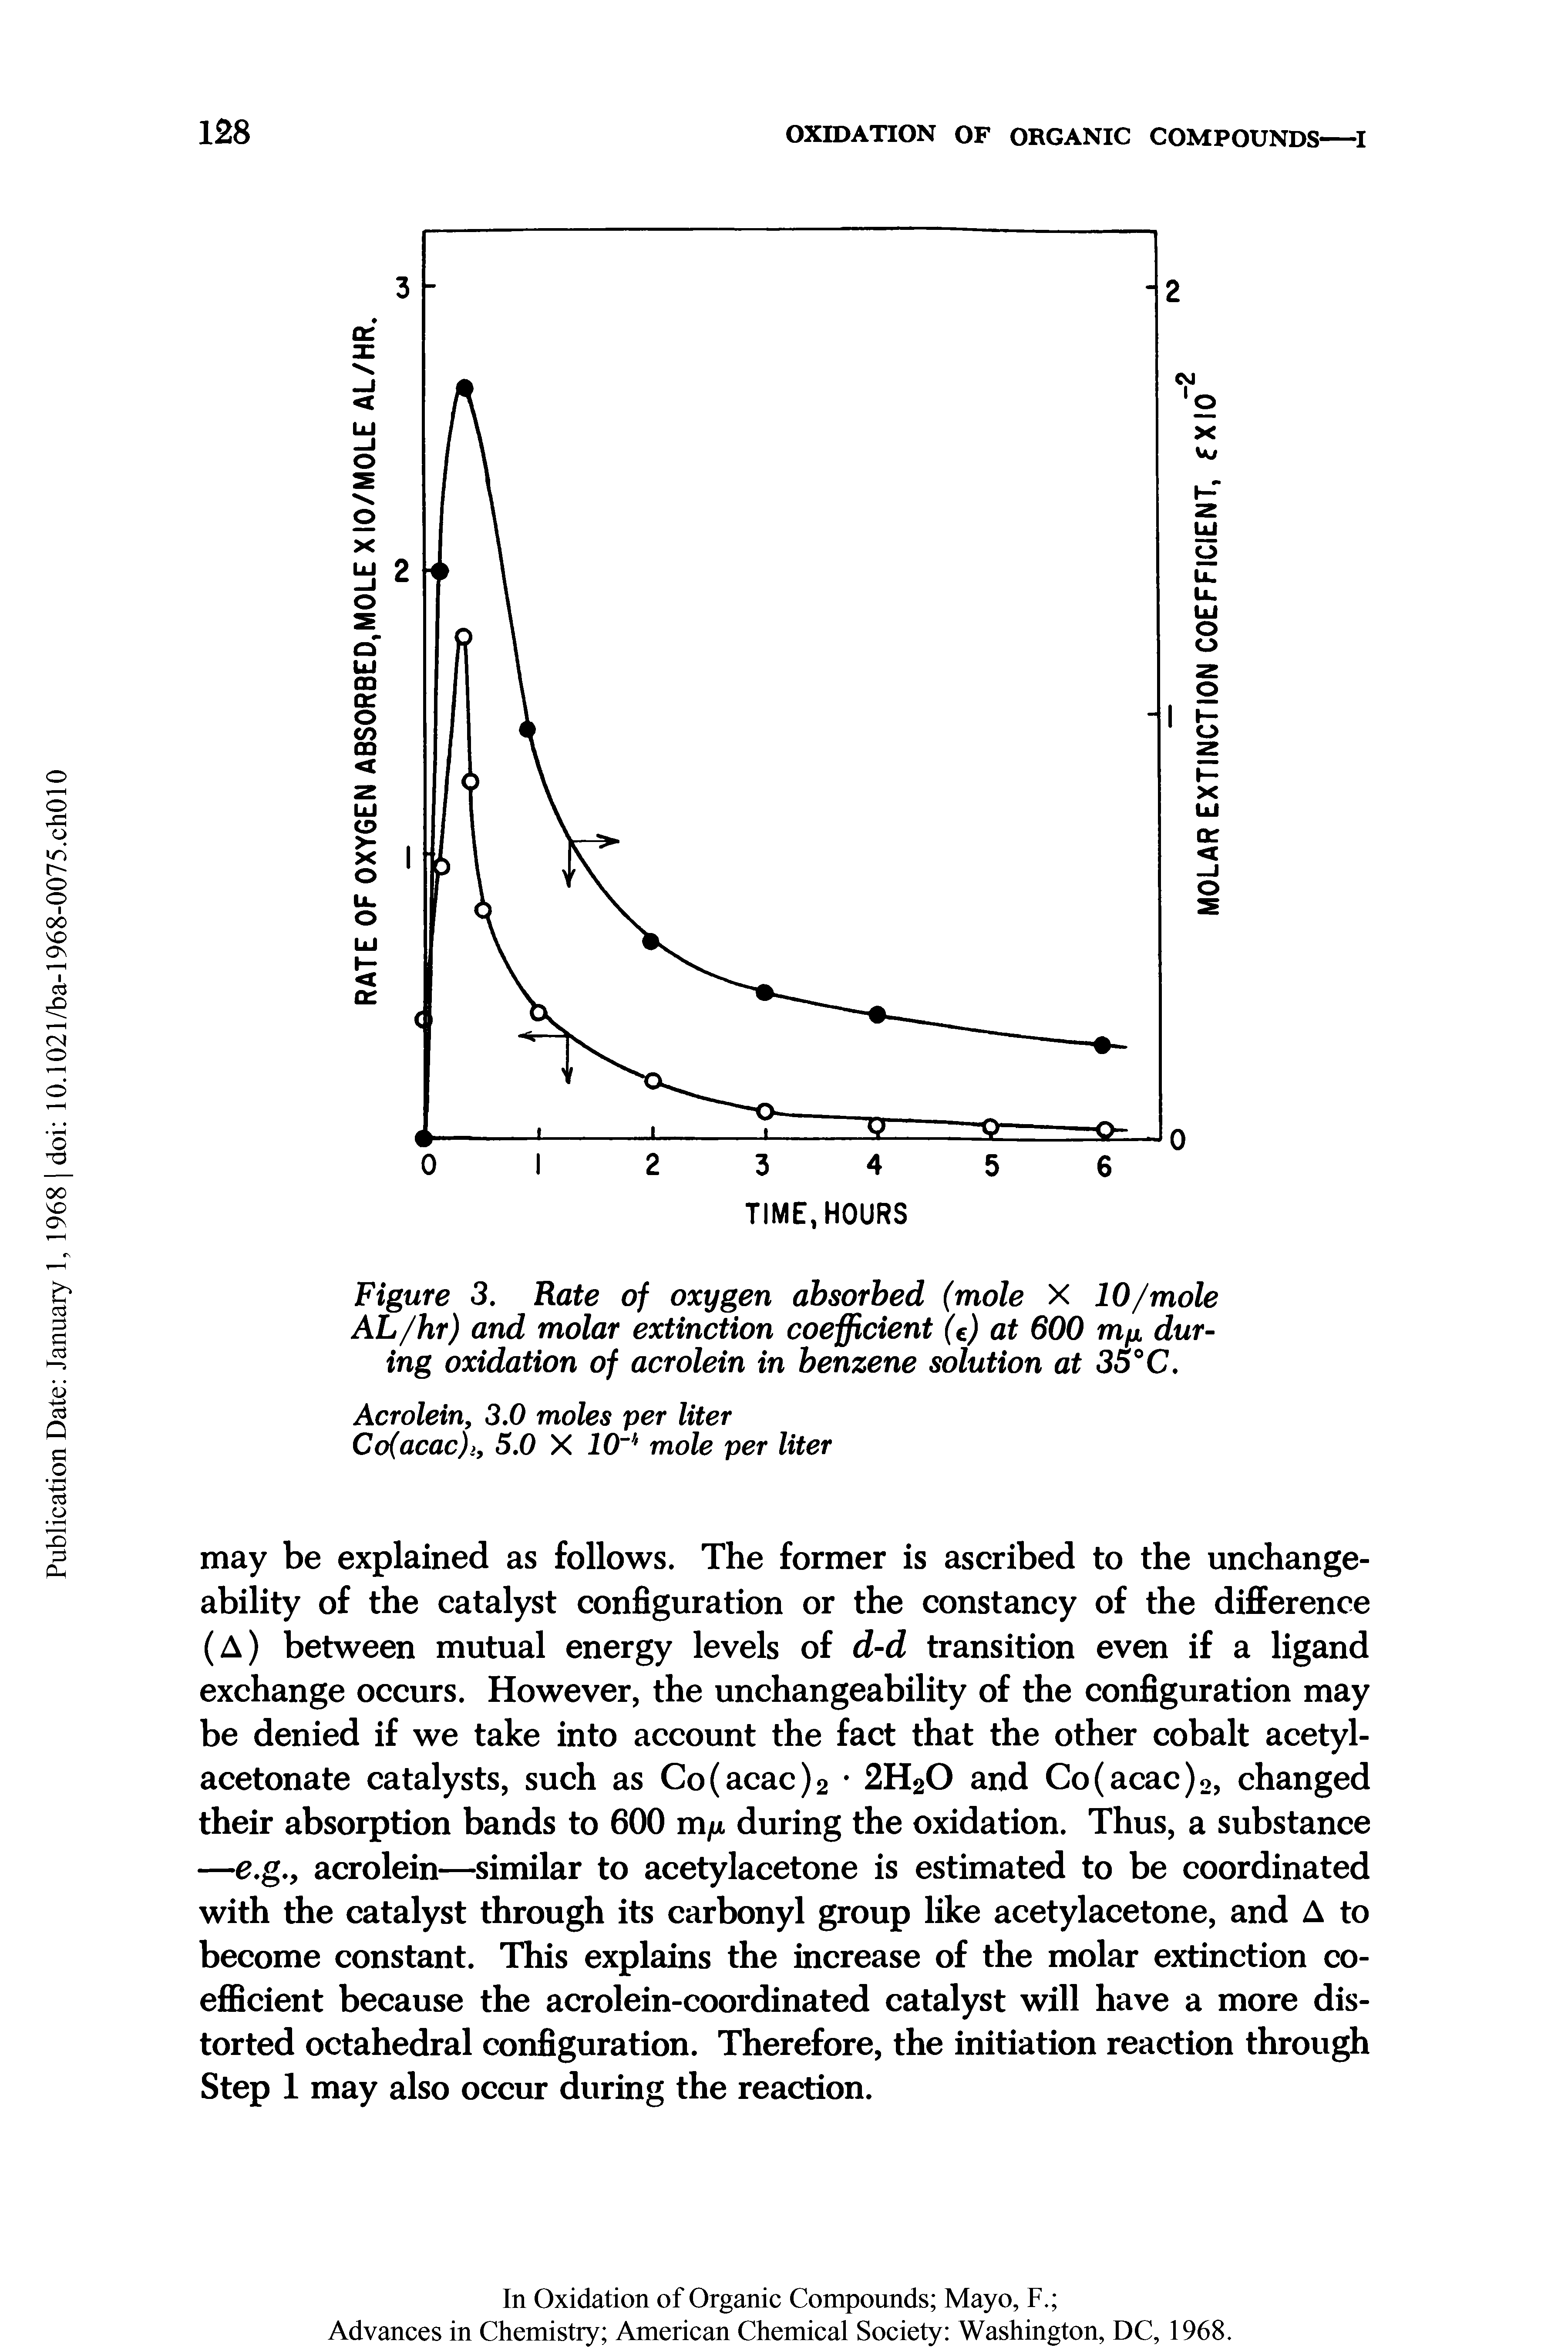 Figure 3. Rate of oxygen absorbed (mole X 10/mole AL/hr) and molar extinction coefficient (e) at 600 m during oxidation of acrolein in benzene solution at 35°C.